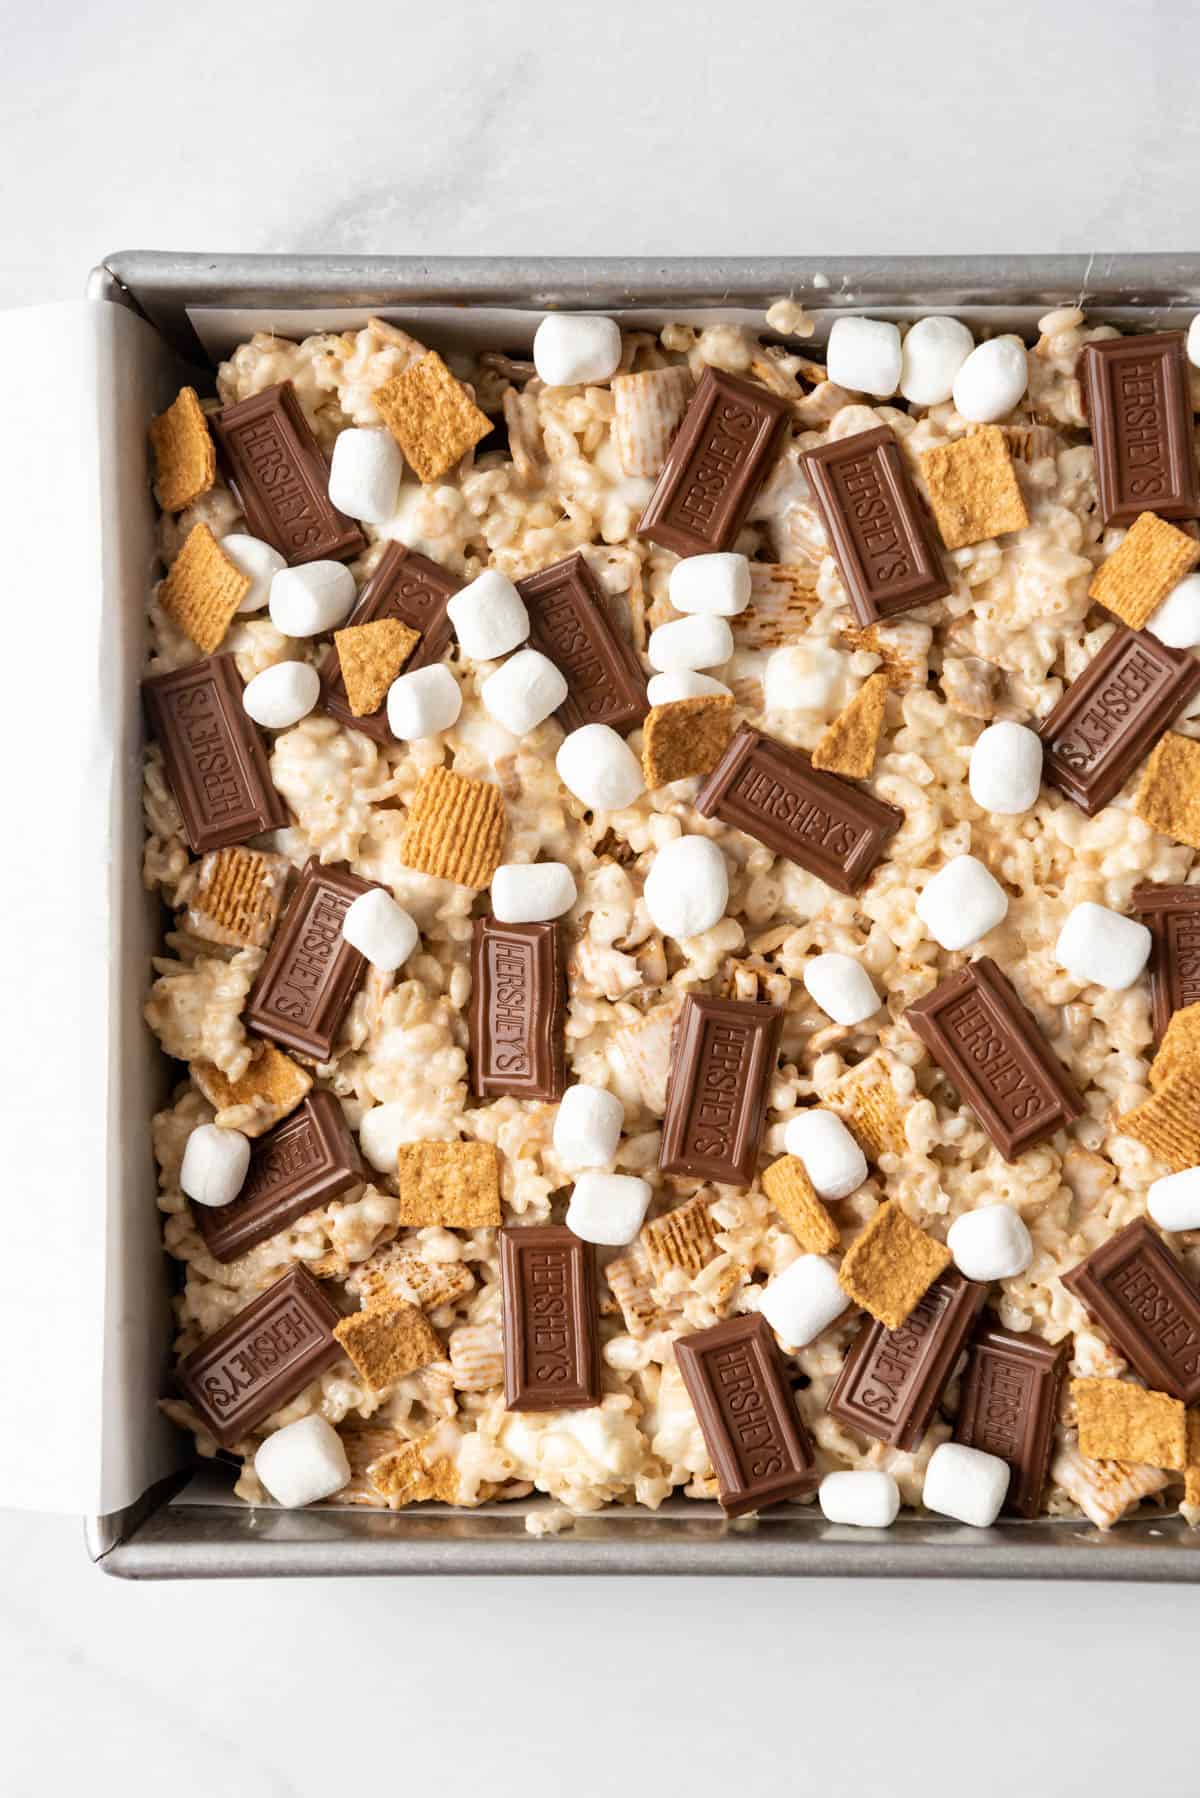 A close image of s'mores rice krispie treats with golden grahams cereal, marshmallows and chocolate bars sprinkled on top.